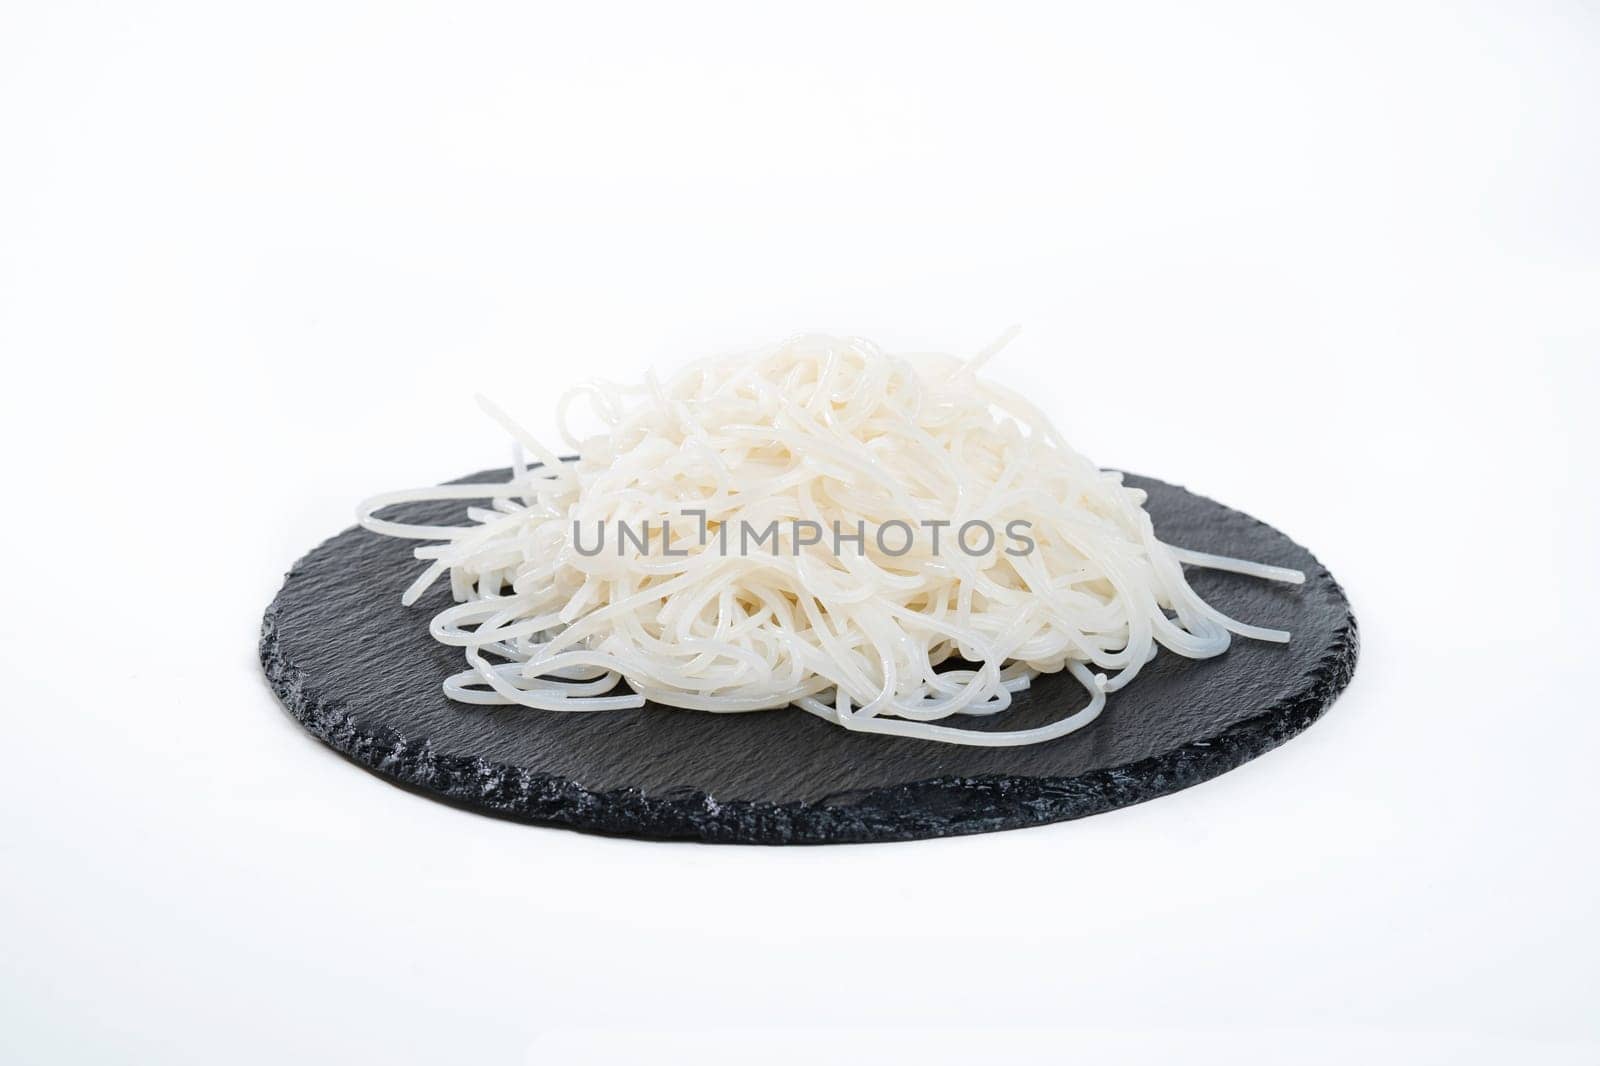 amazing and delicious rice noodles on a black plate. Garnish. View from above. Chinese cuisine, hotpot ingredient by tewolf